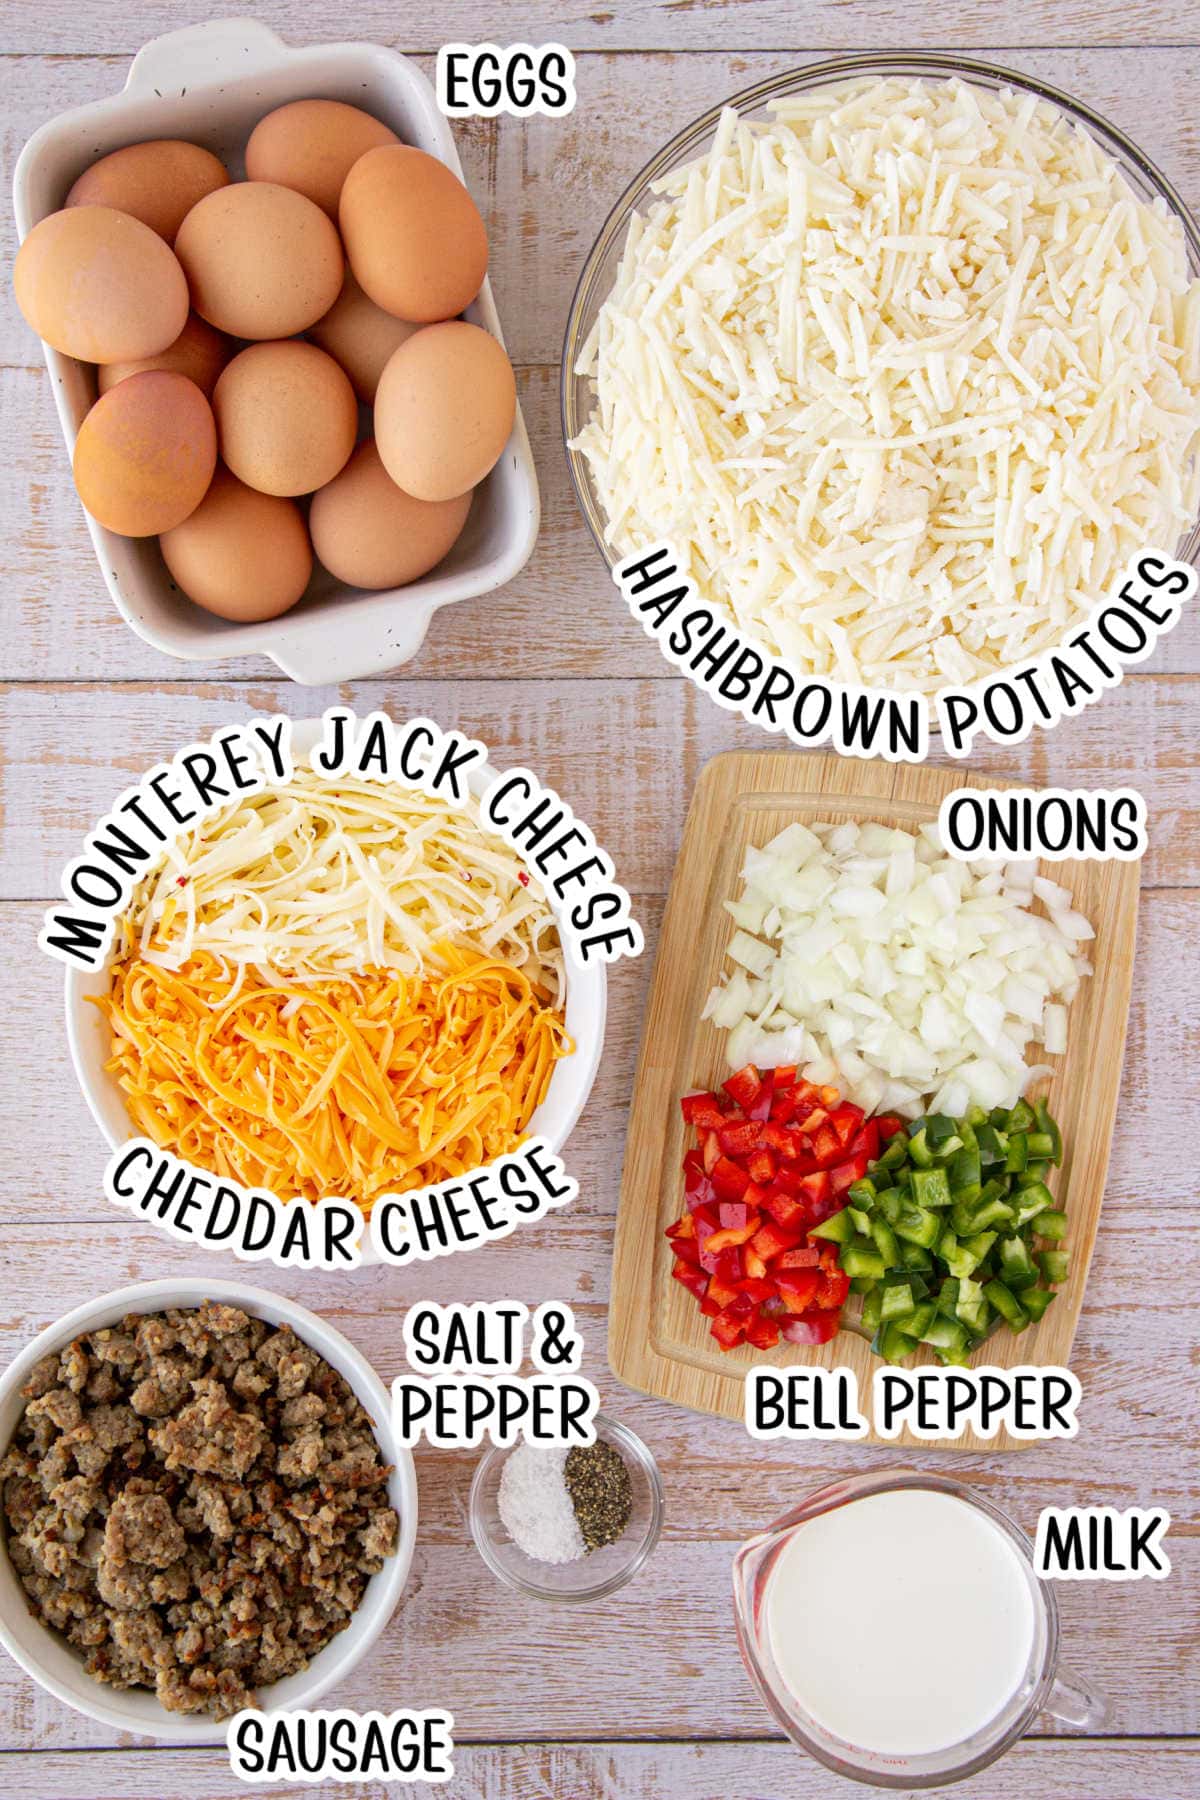 Ingredients for this casserole.